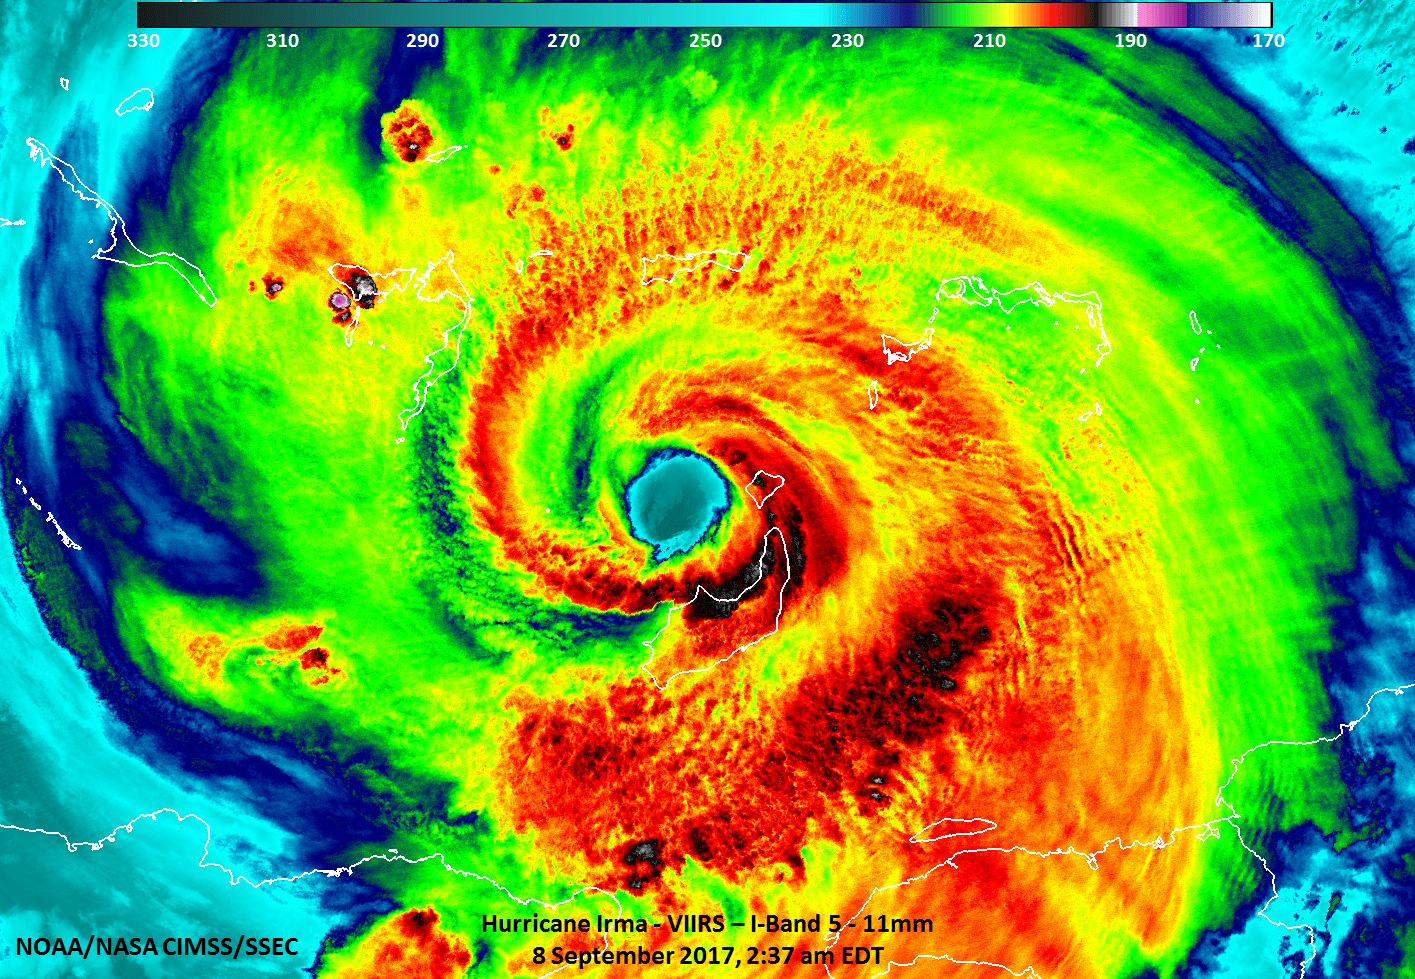 Infrared image of Irma, which looks like a tie dye spiral with reds, yellows, greens, and blues.